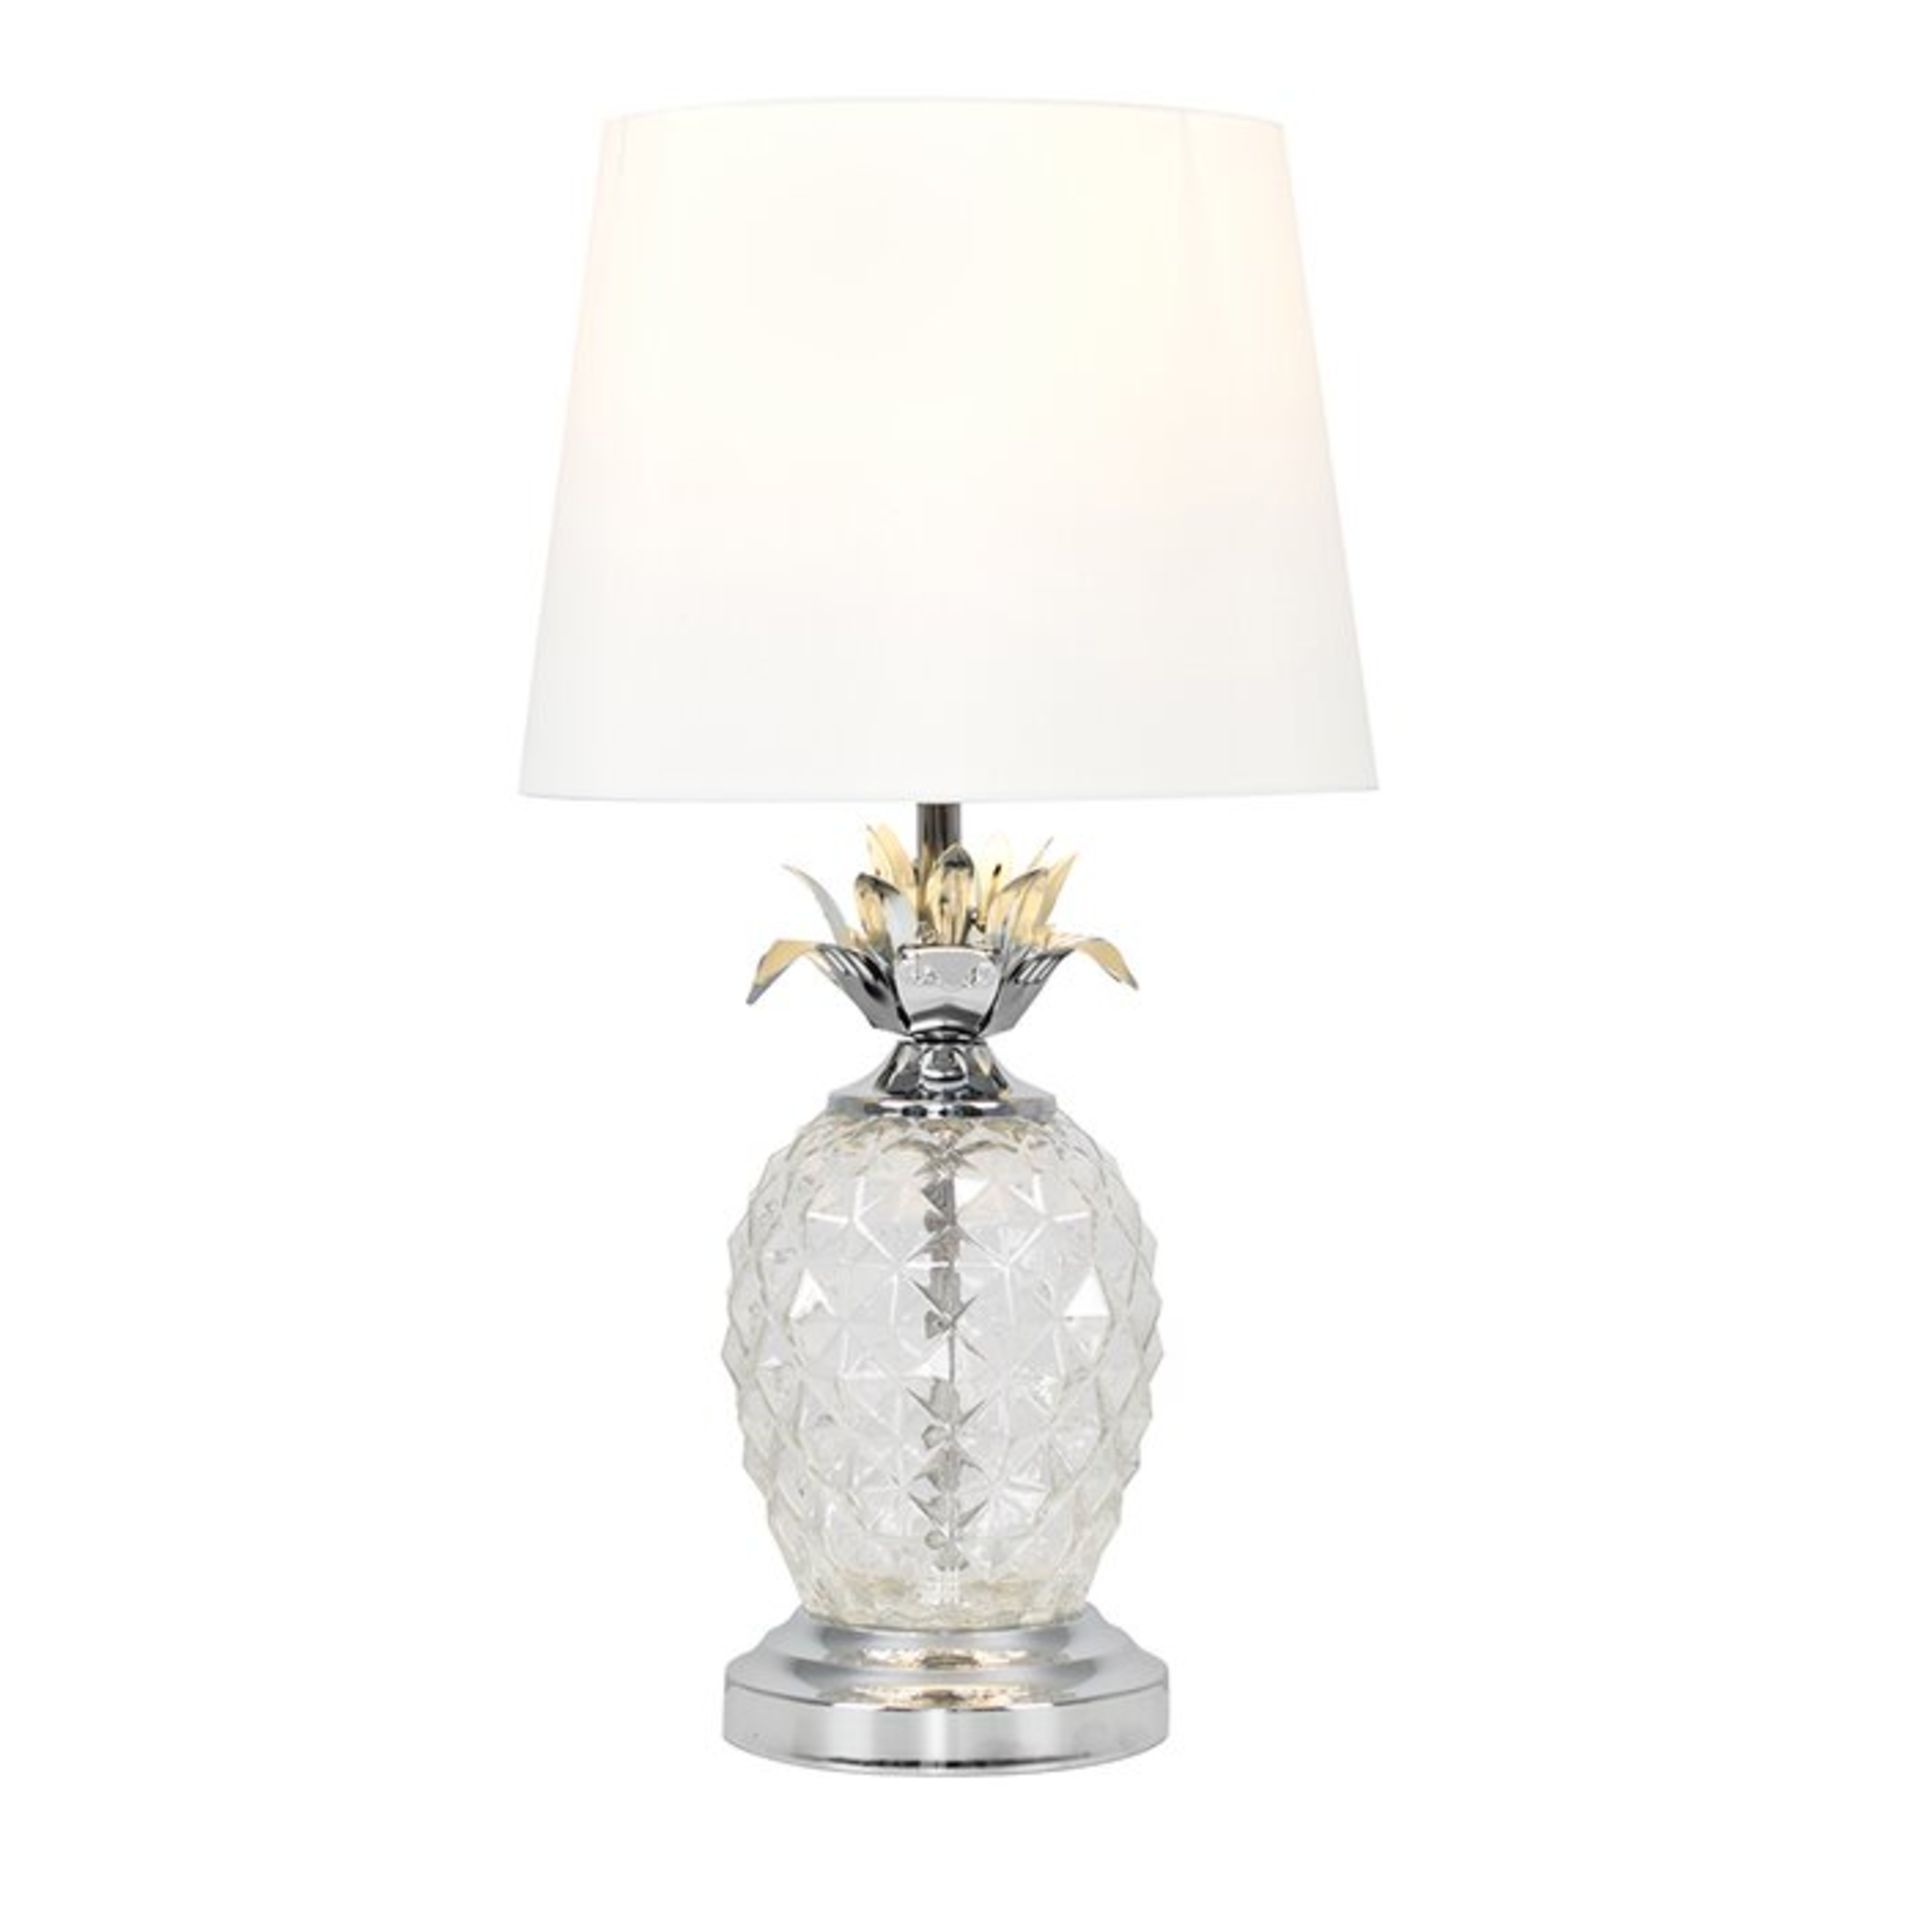 Dempster 41cm Table Lamp - RRP £49.99